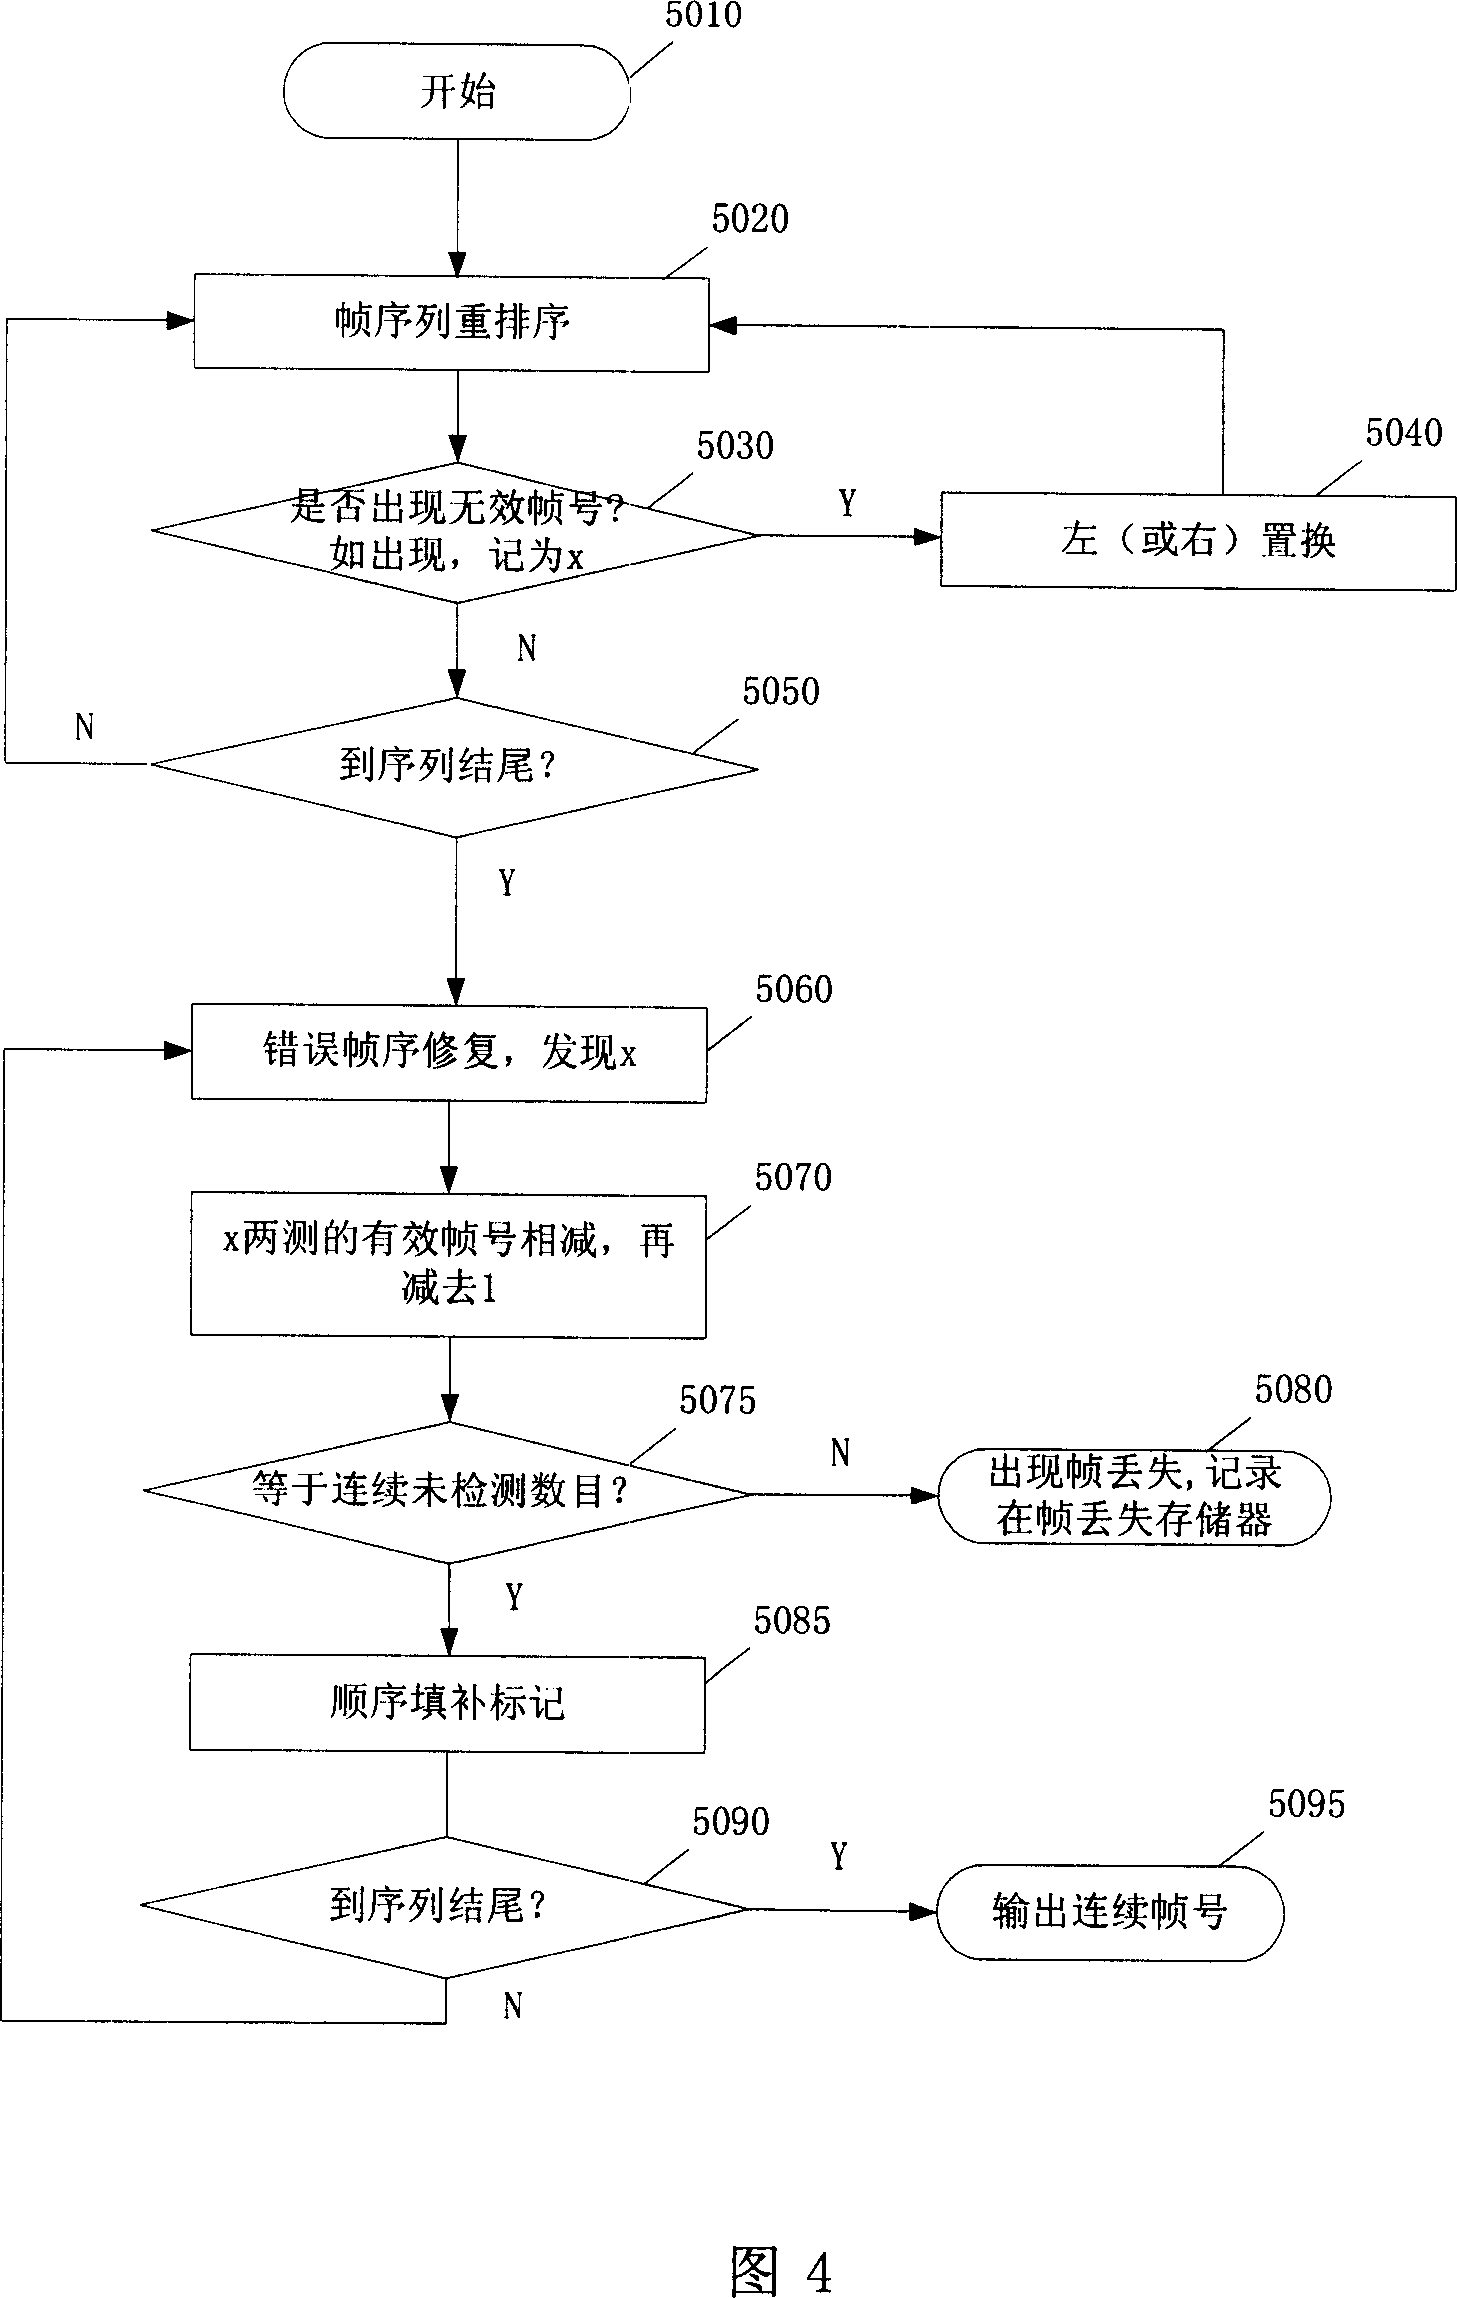 Digital marking structure, verifying method and monitoring broadcasting system in stream medium monitoring and broadcasting